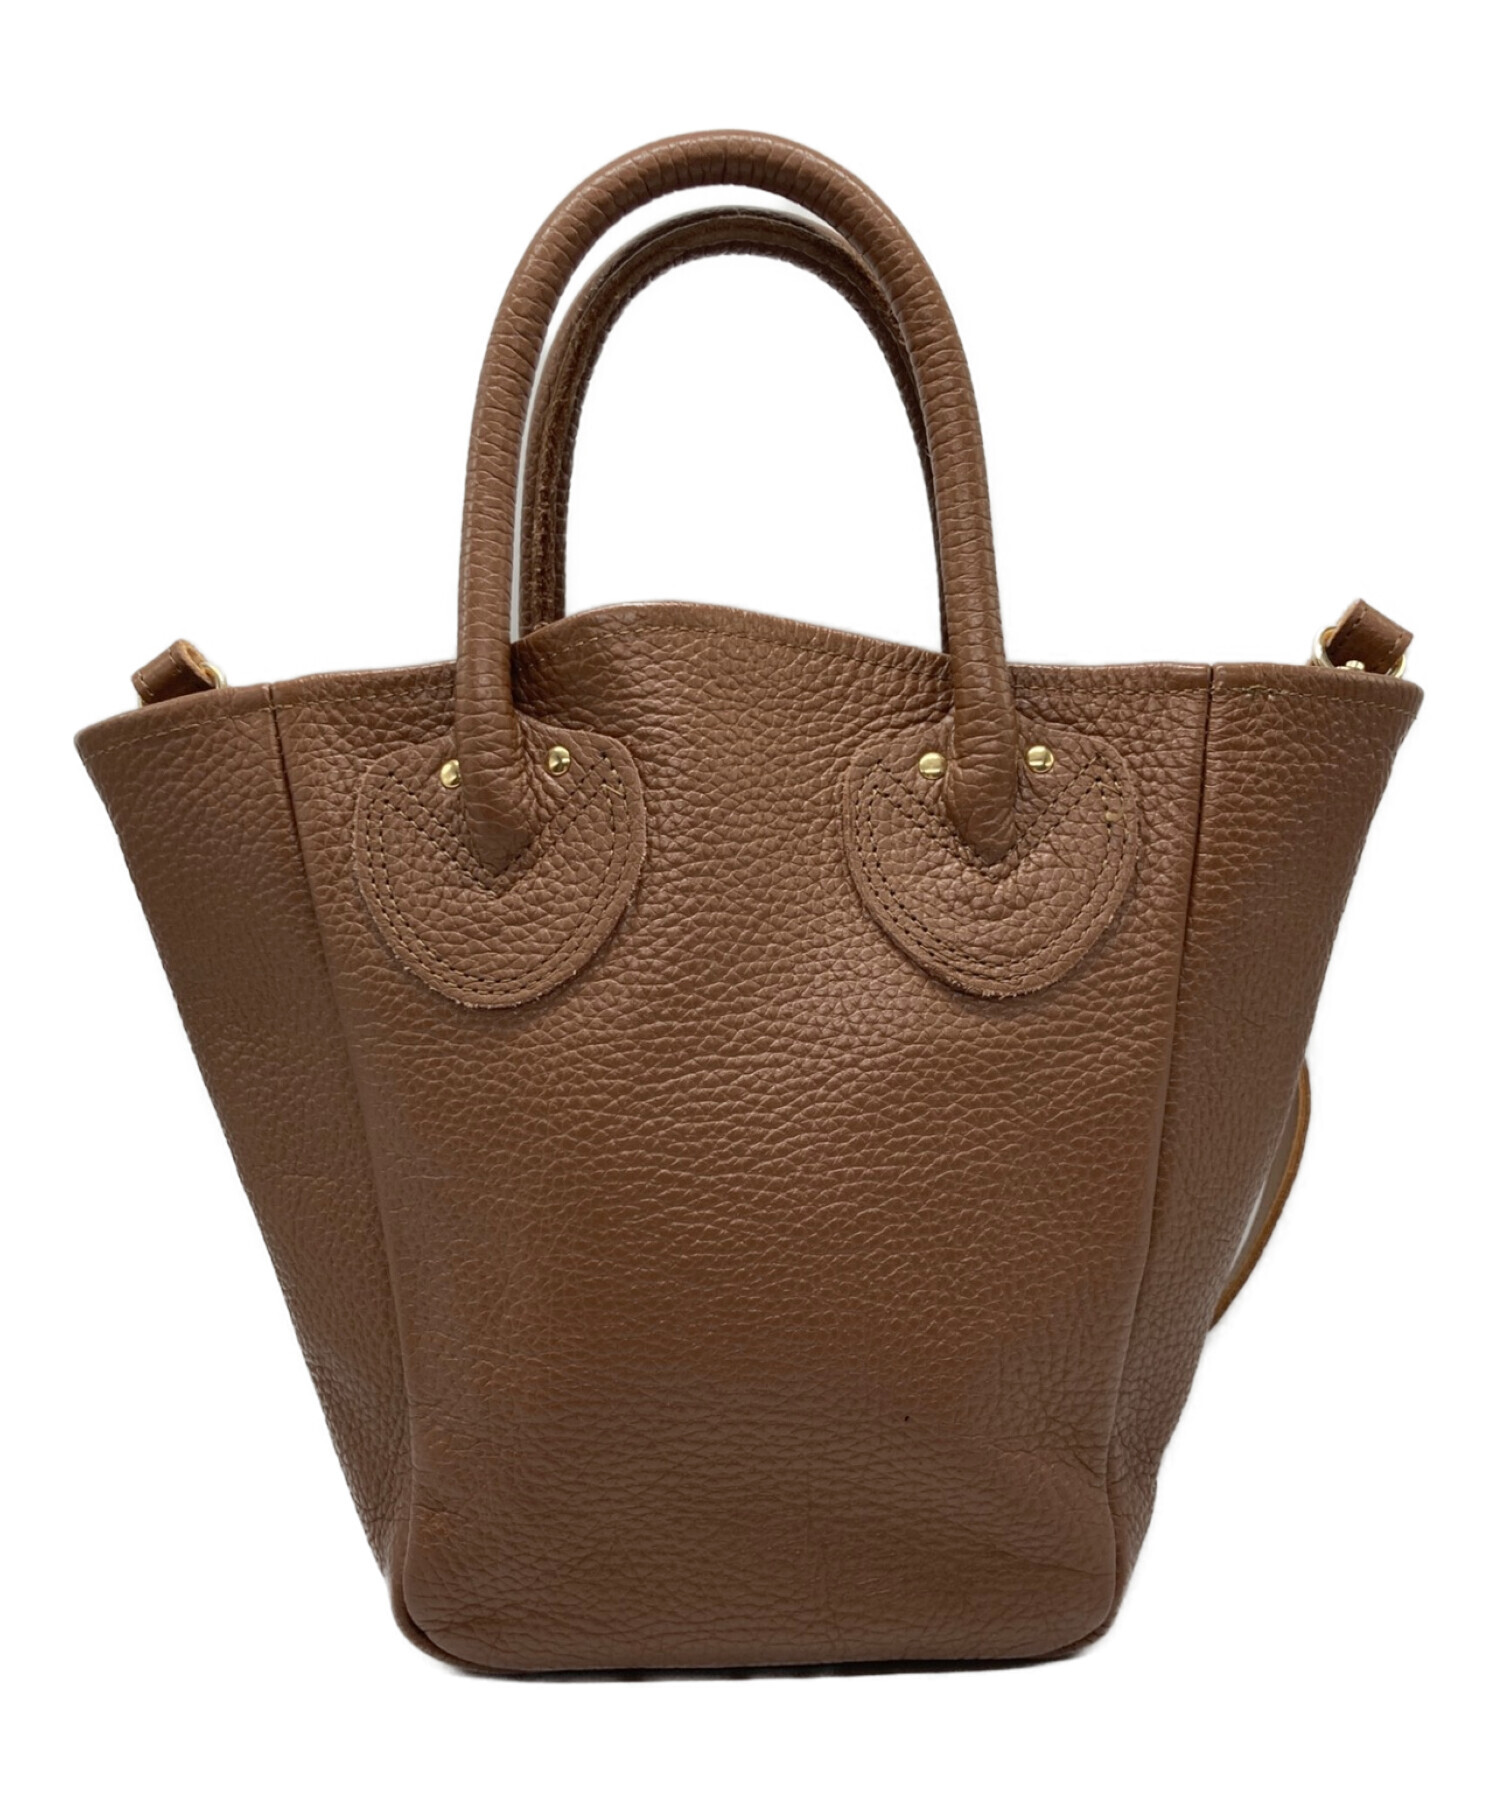 YOUNG & OLSEN The DRYGOODS STORE (ヤングアンドオルセン ザ ドライグッズストア) PETITE LEATHER  TOTE 2way バッグ ブラウン